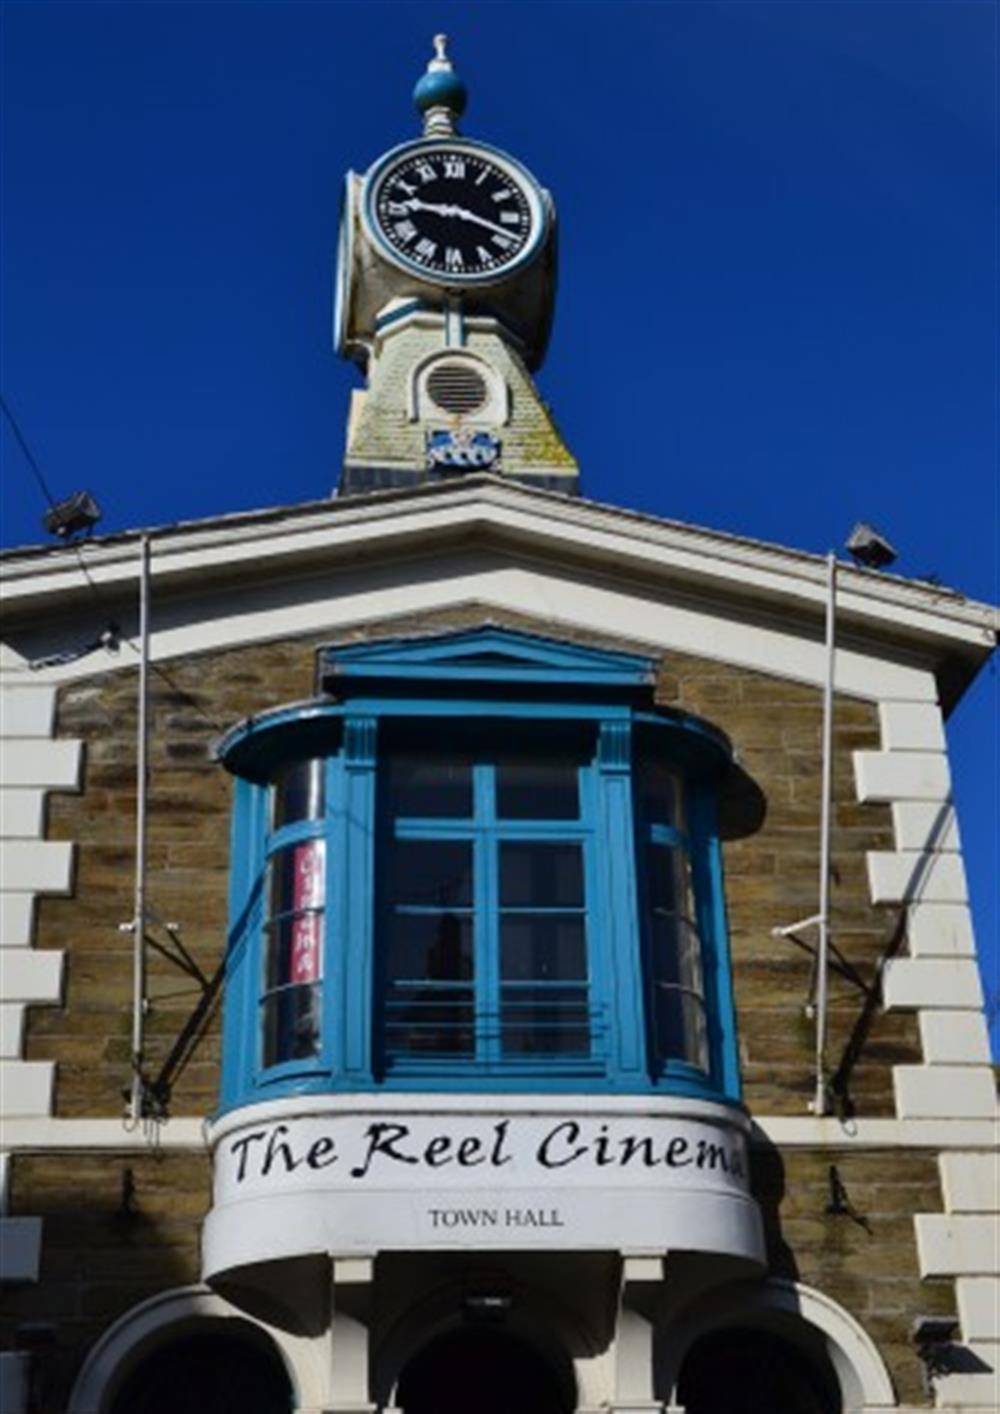 There is a independent cinema in the town centre - ideal for a rainy day!